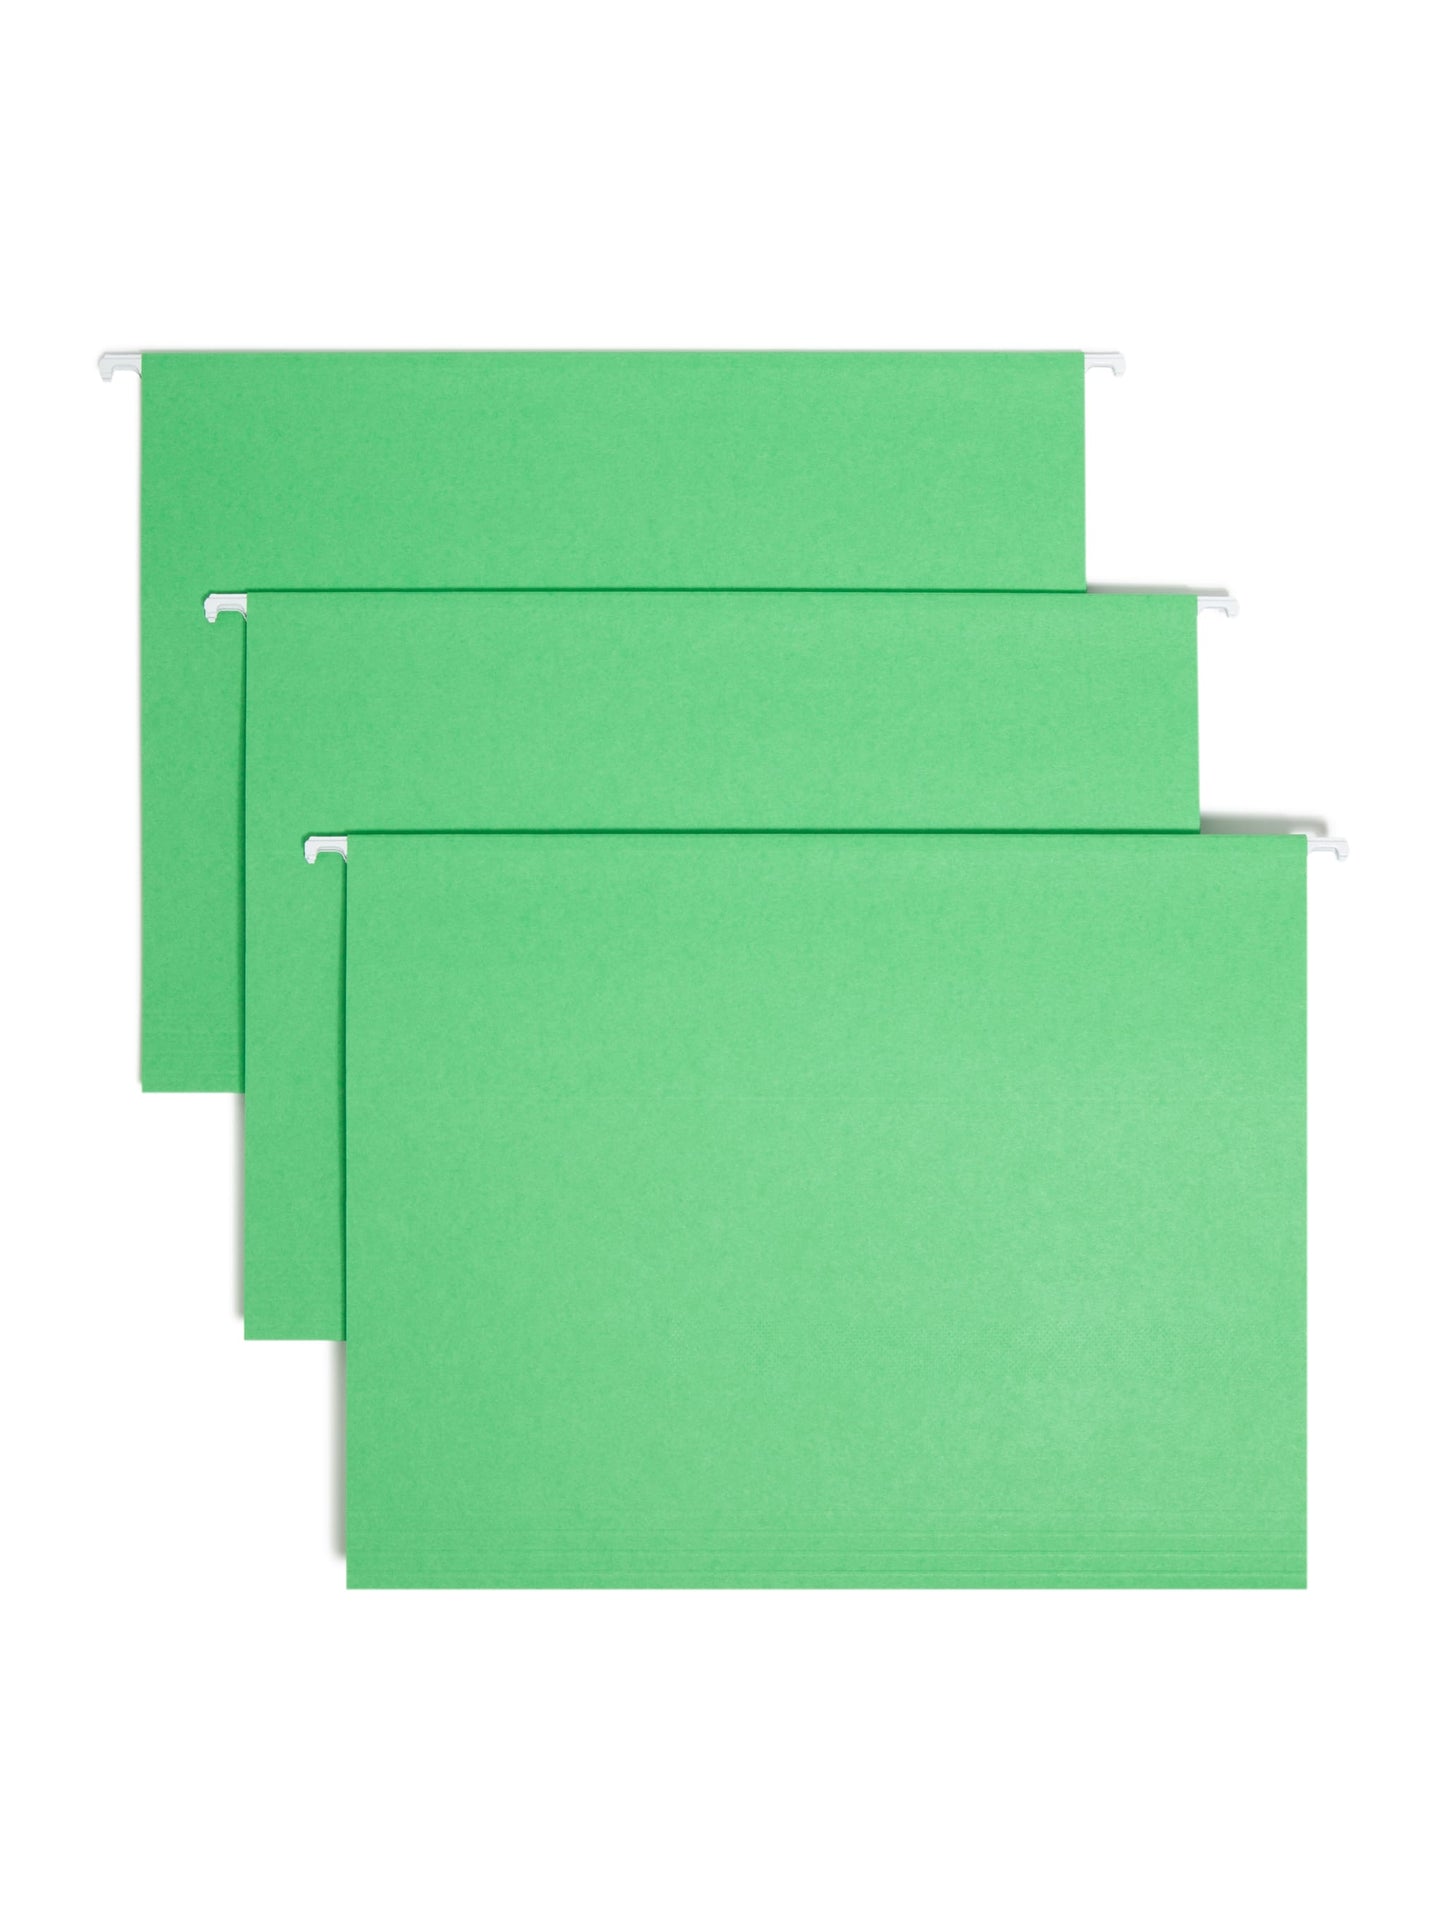 Standard Hanging File Folders with 1/5-Cut Tabs, Green Color, Letter Size, Set of 25, 086486640619